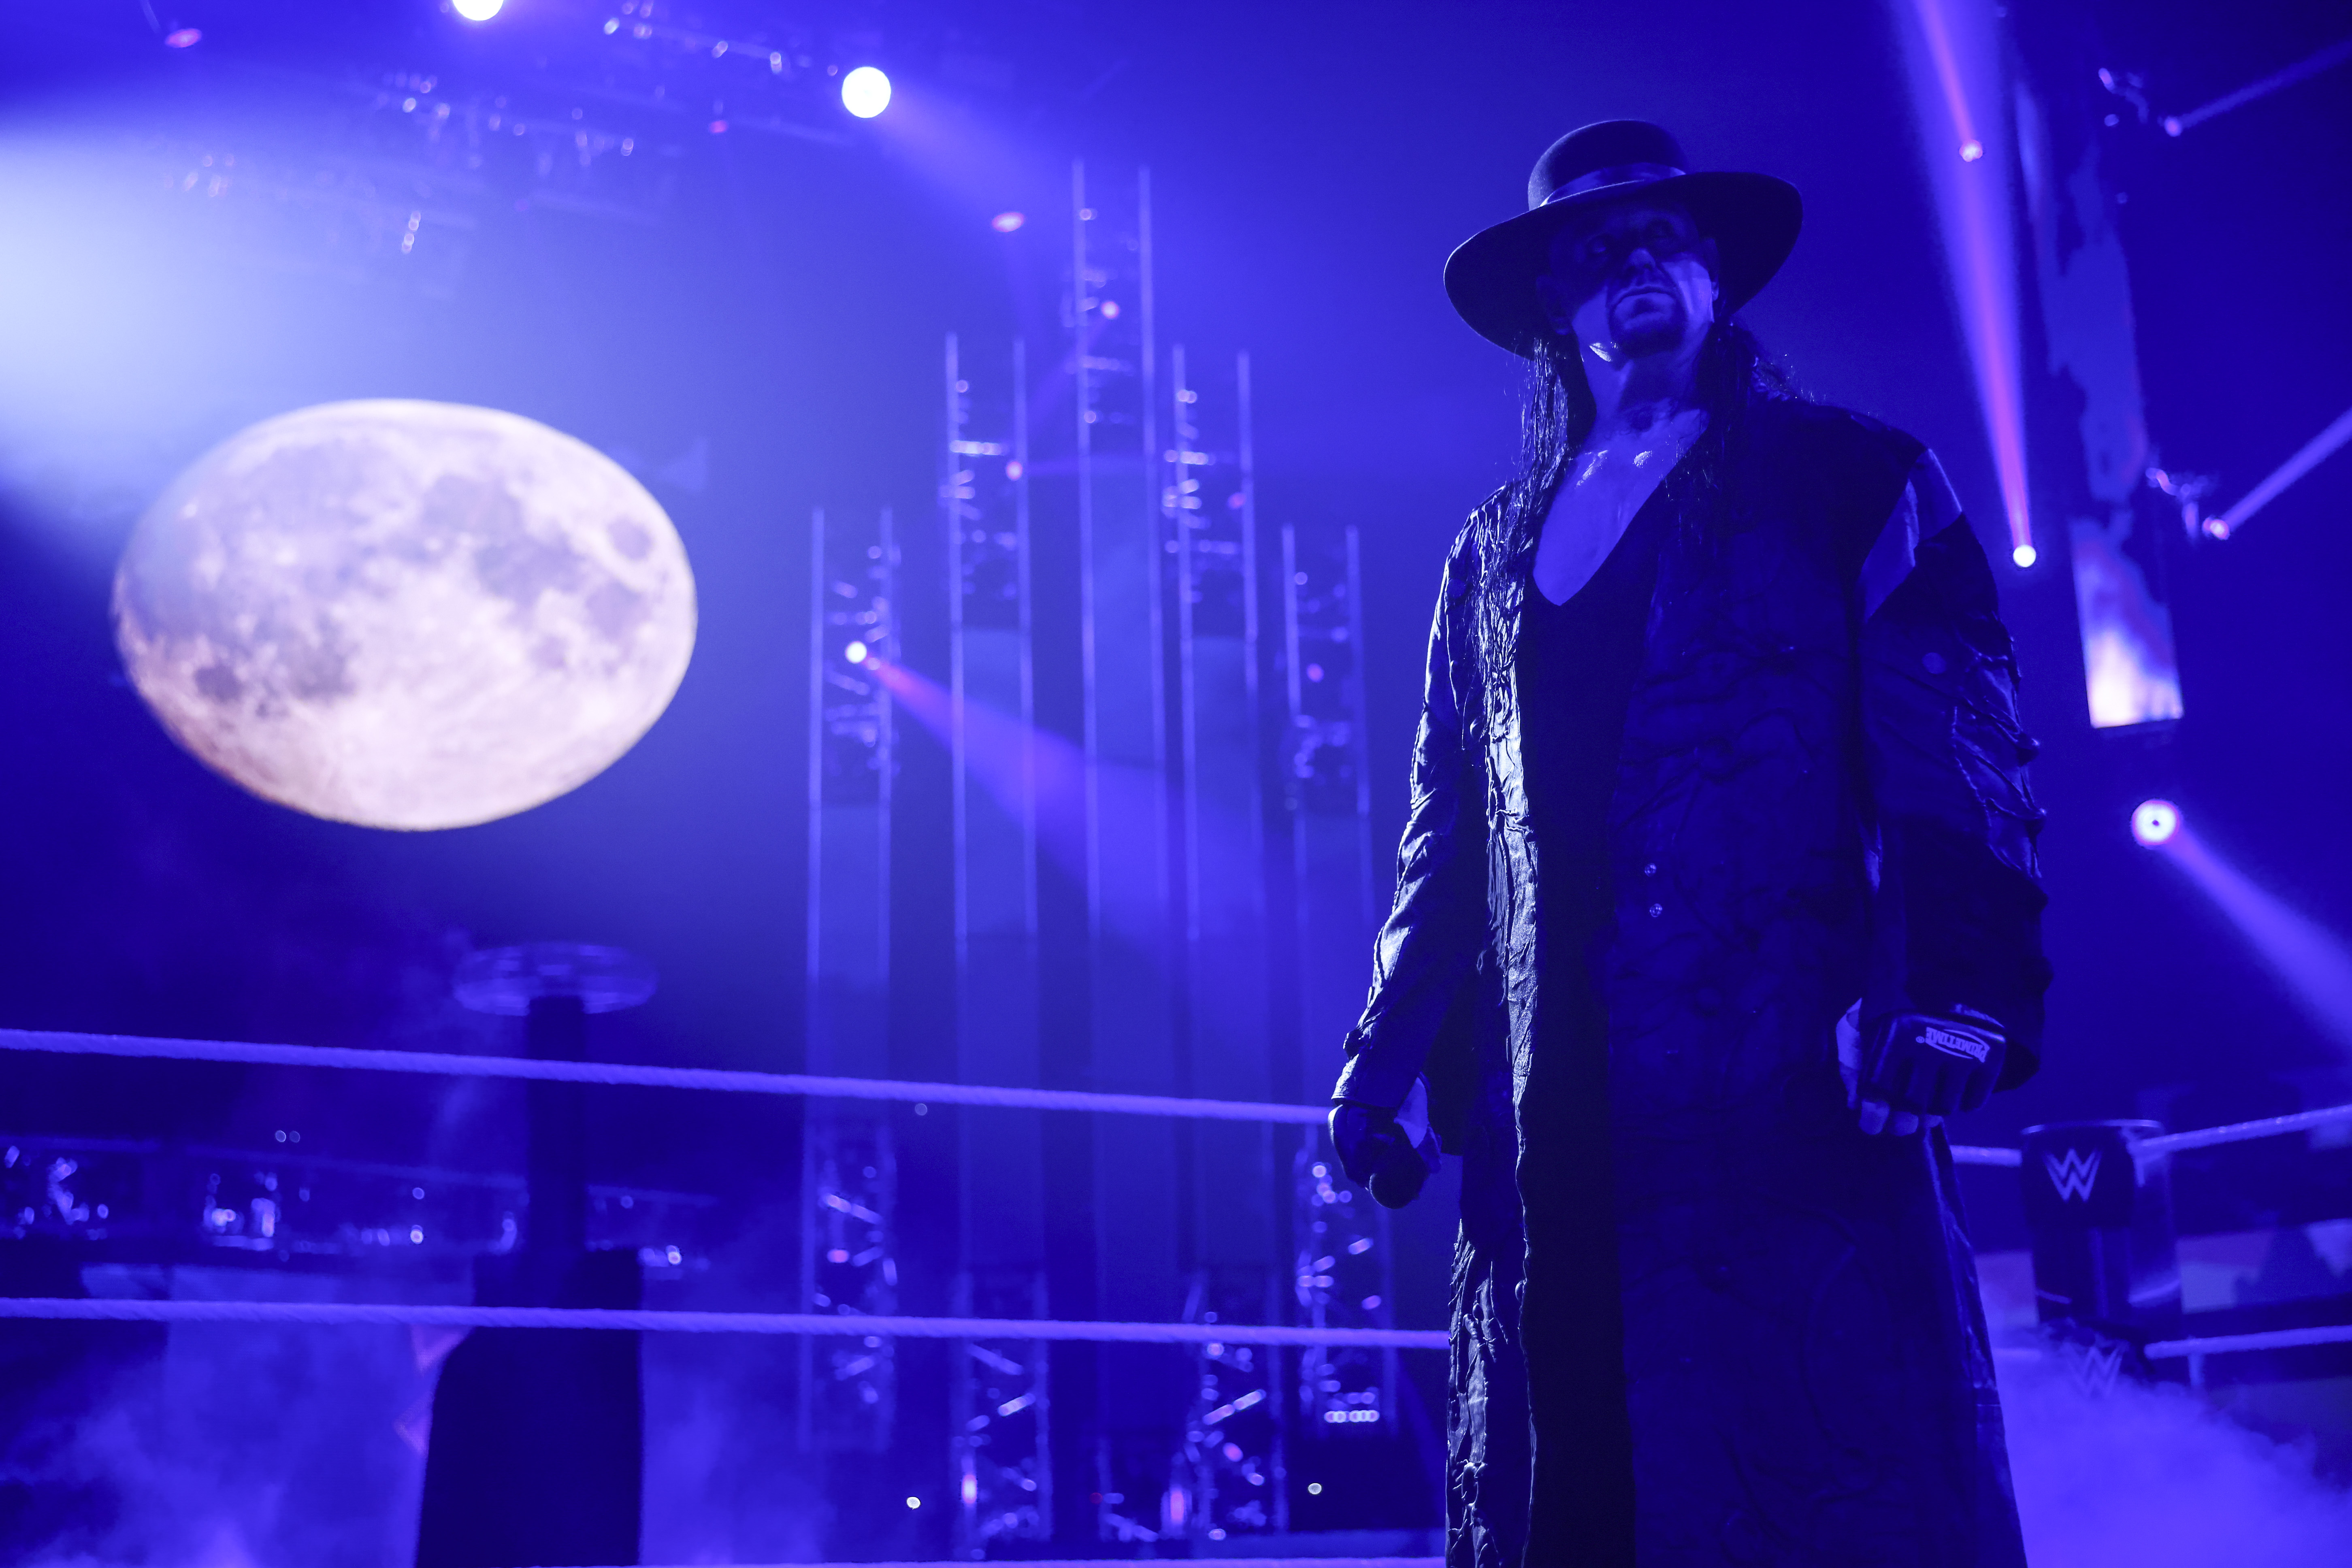 30 unforgettable Undertaker moments: WWE Top 10 Special Edition